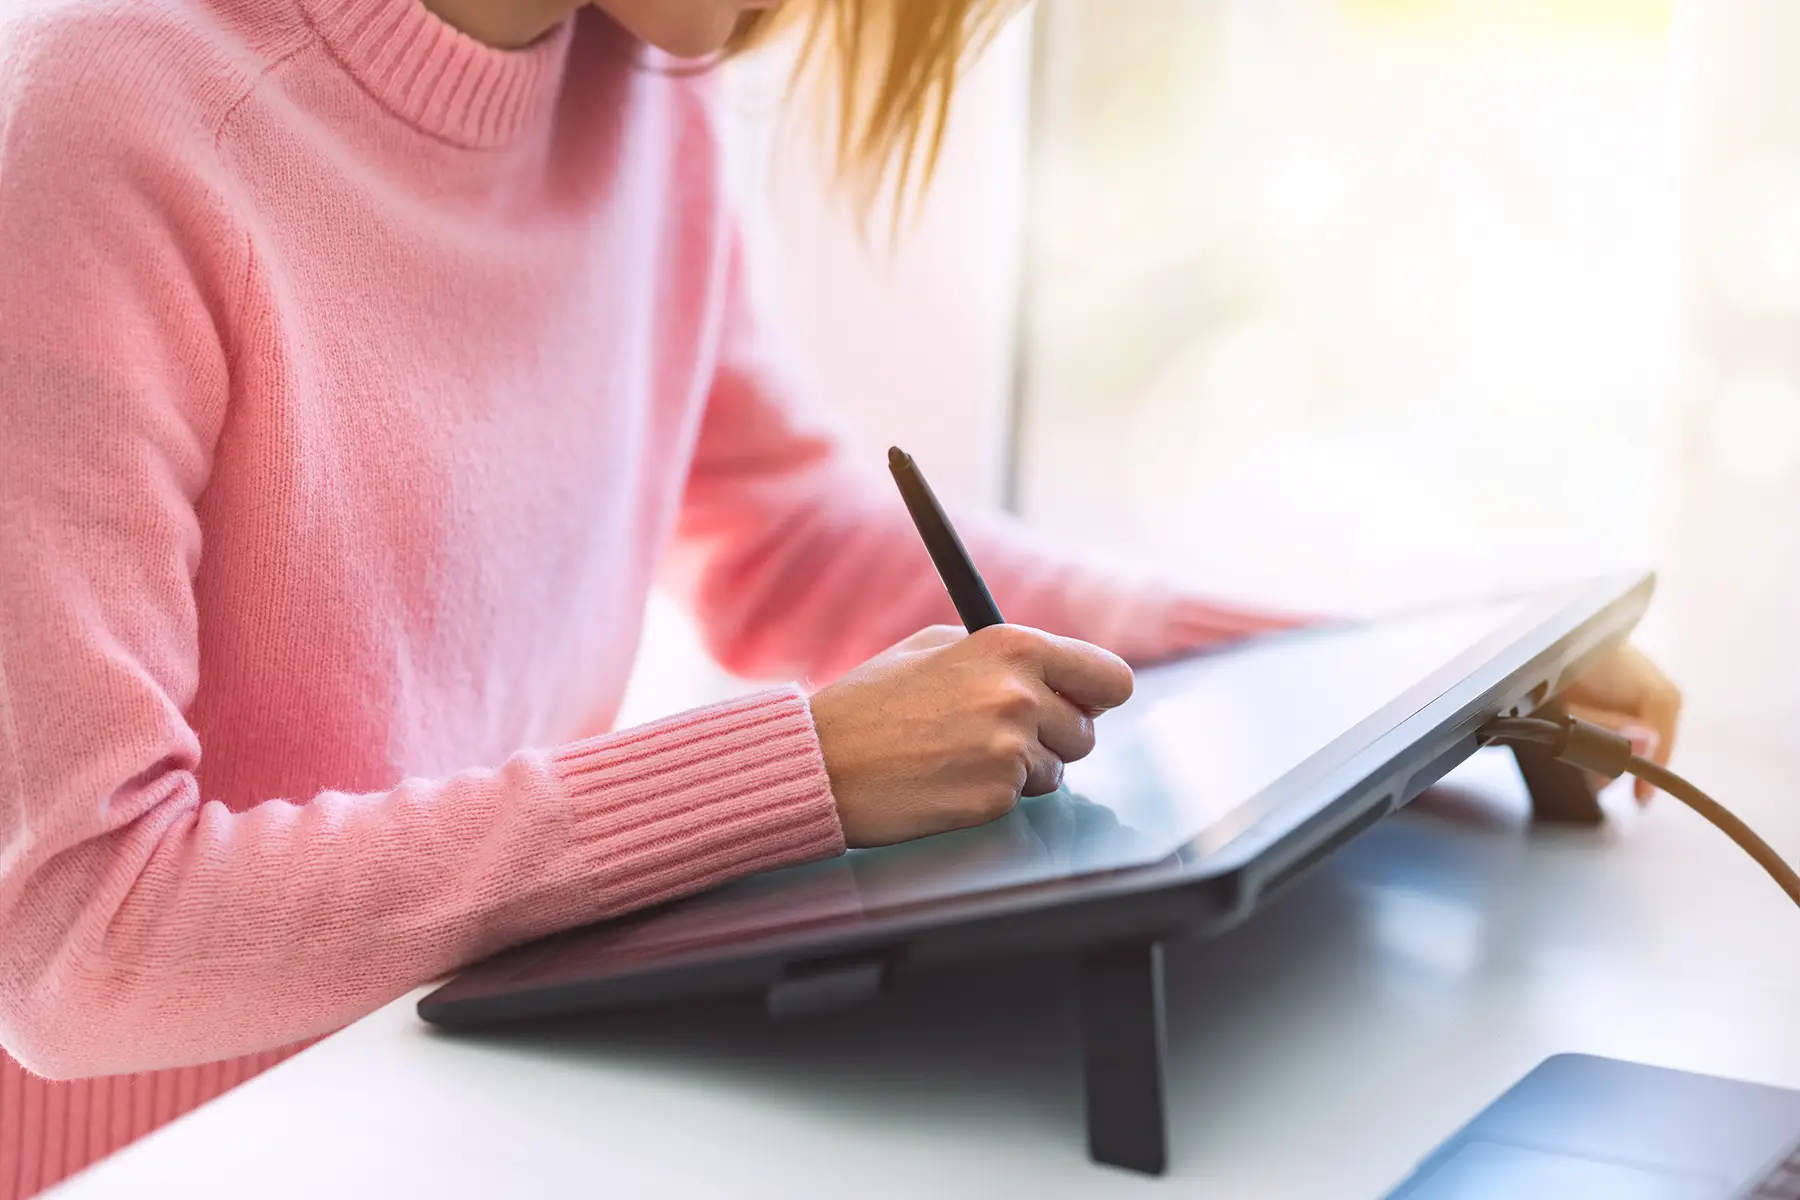 Close-up of a person in a pink jumper using a graphic design tablet